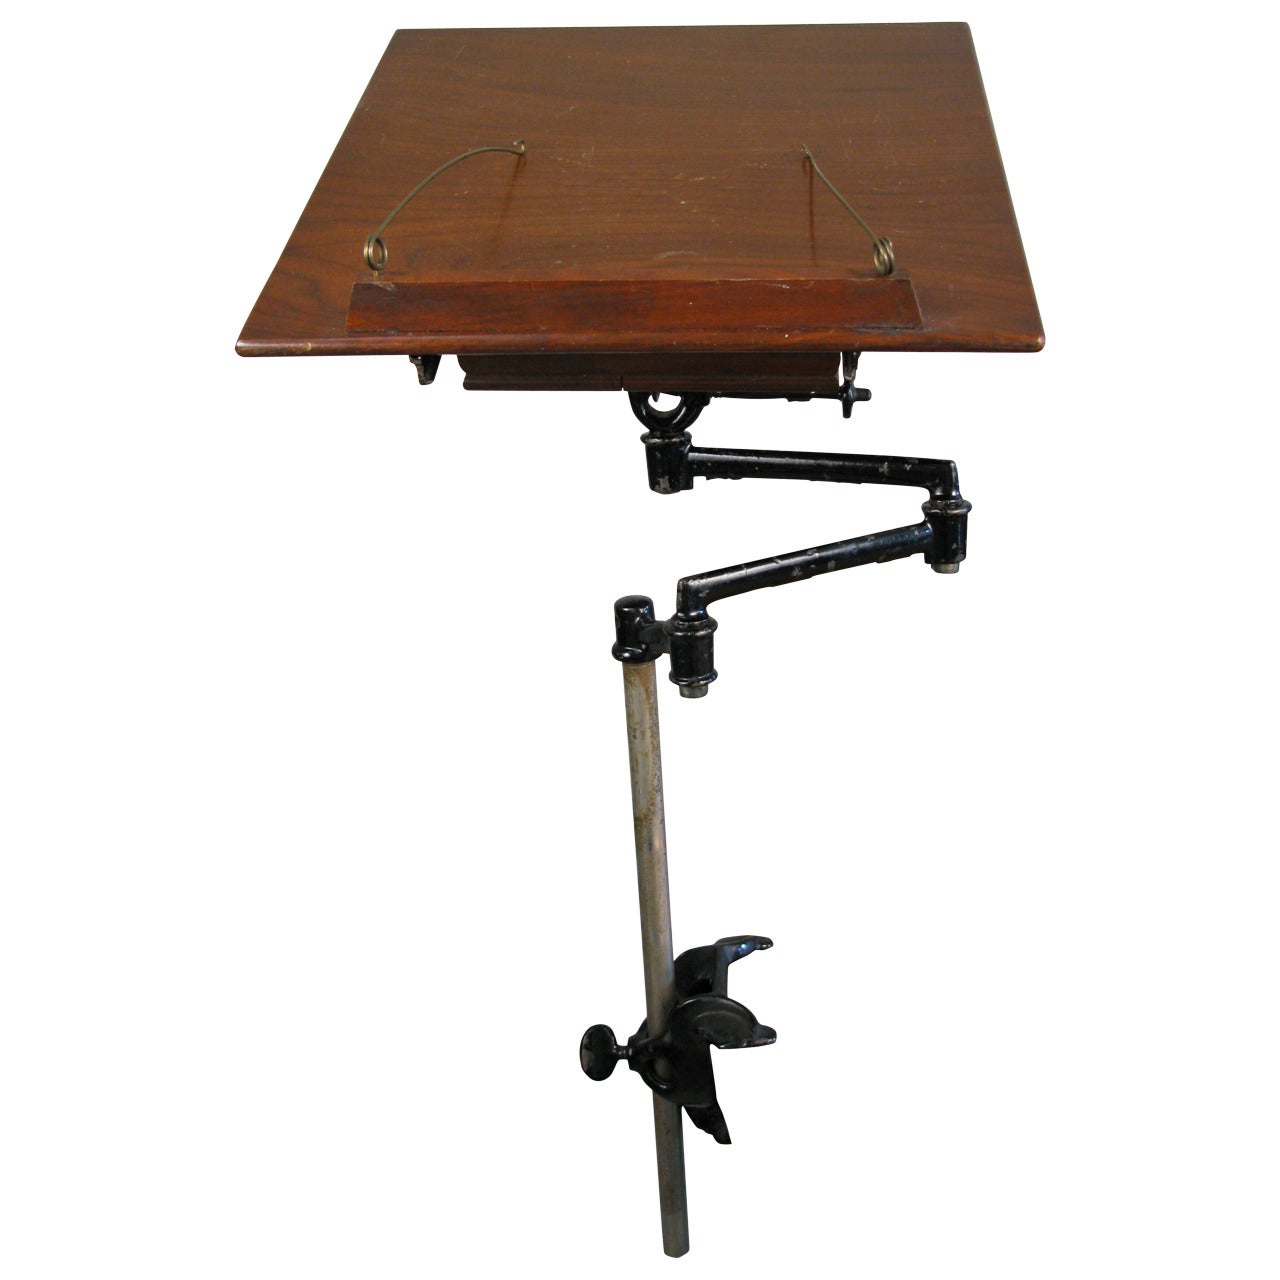 Early 1900s Adjustable Portable Book Stand